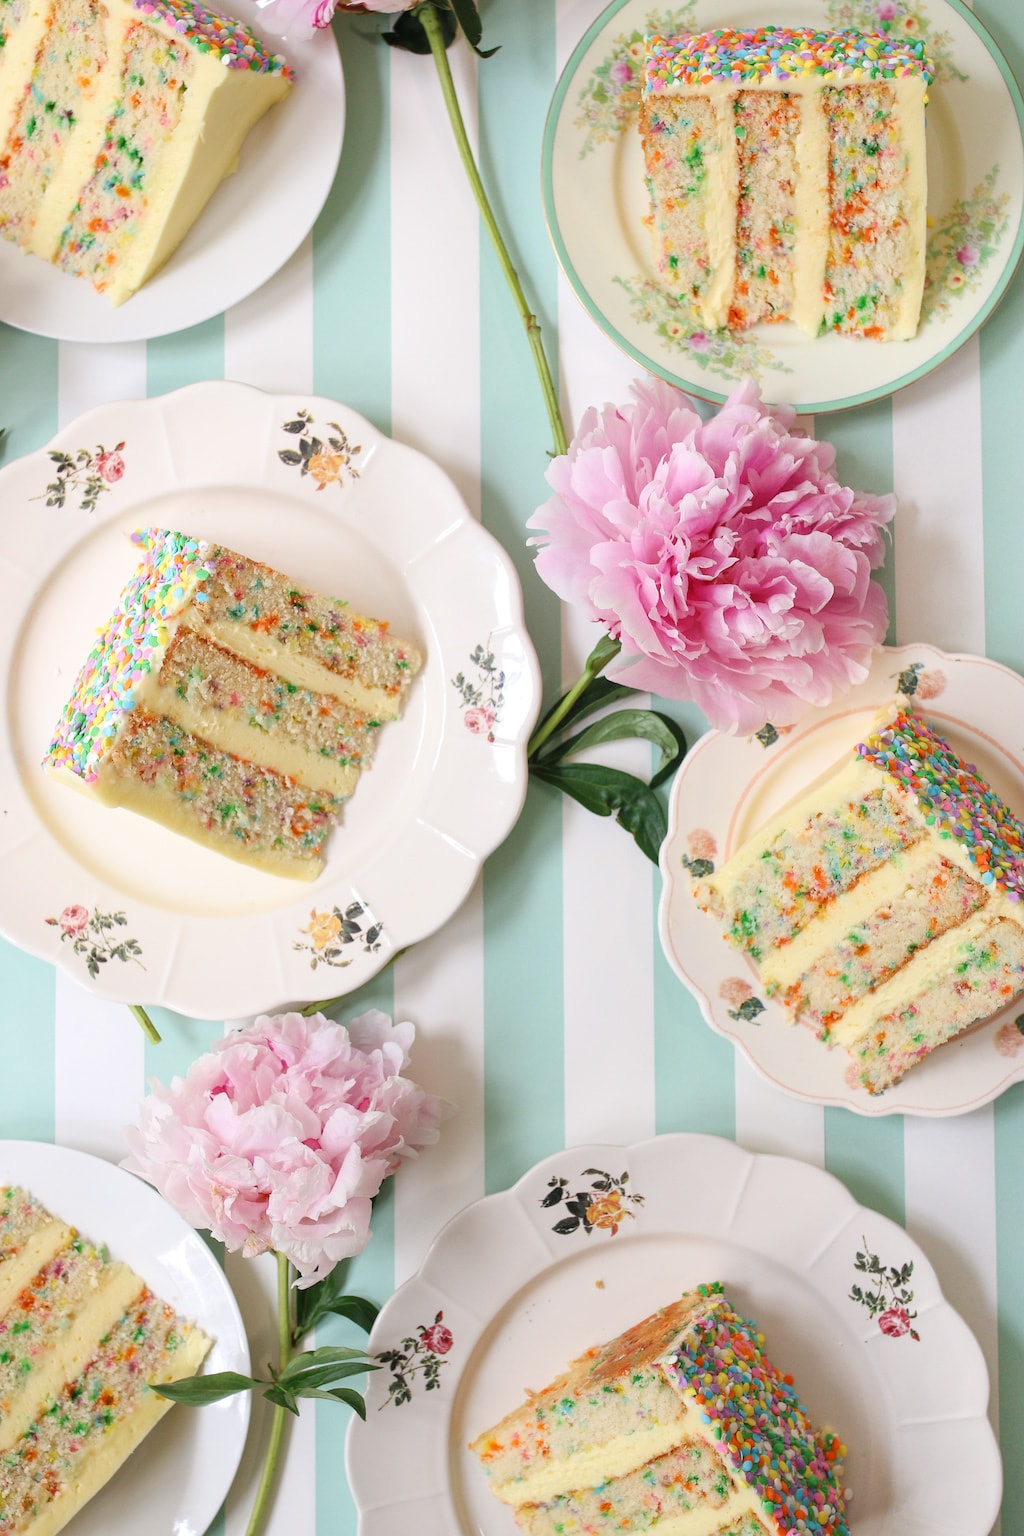 New York Institution Magnolia Bakery Introduces a Whimsical New Look –  PRINT Magazine